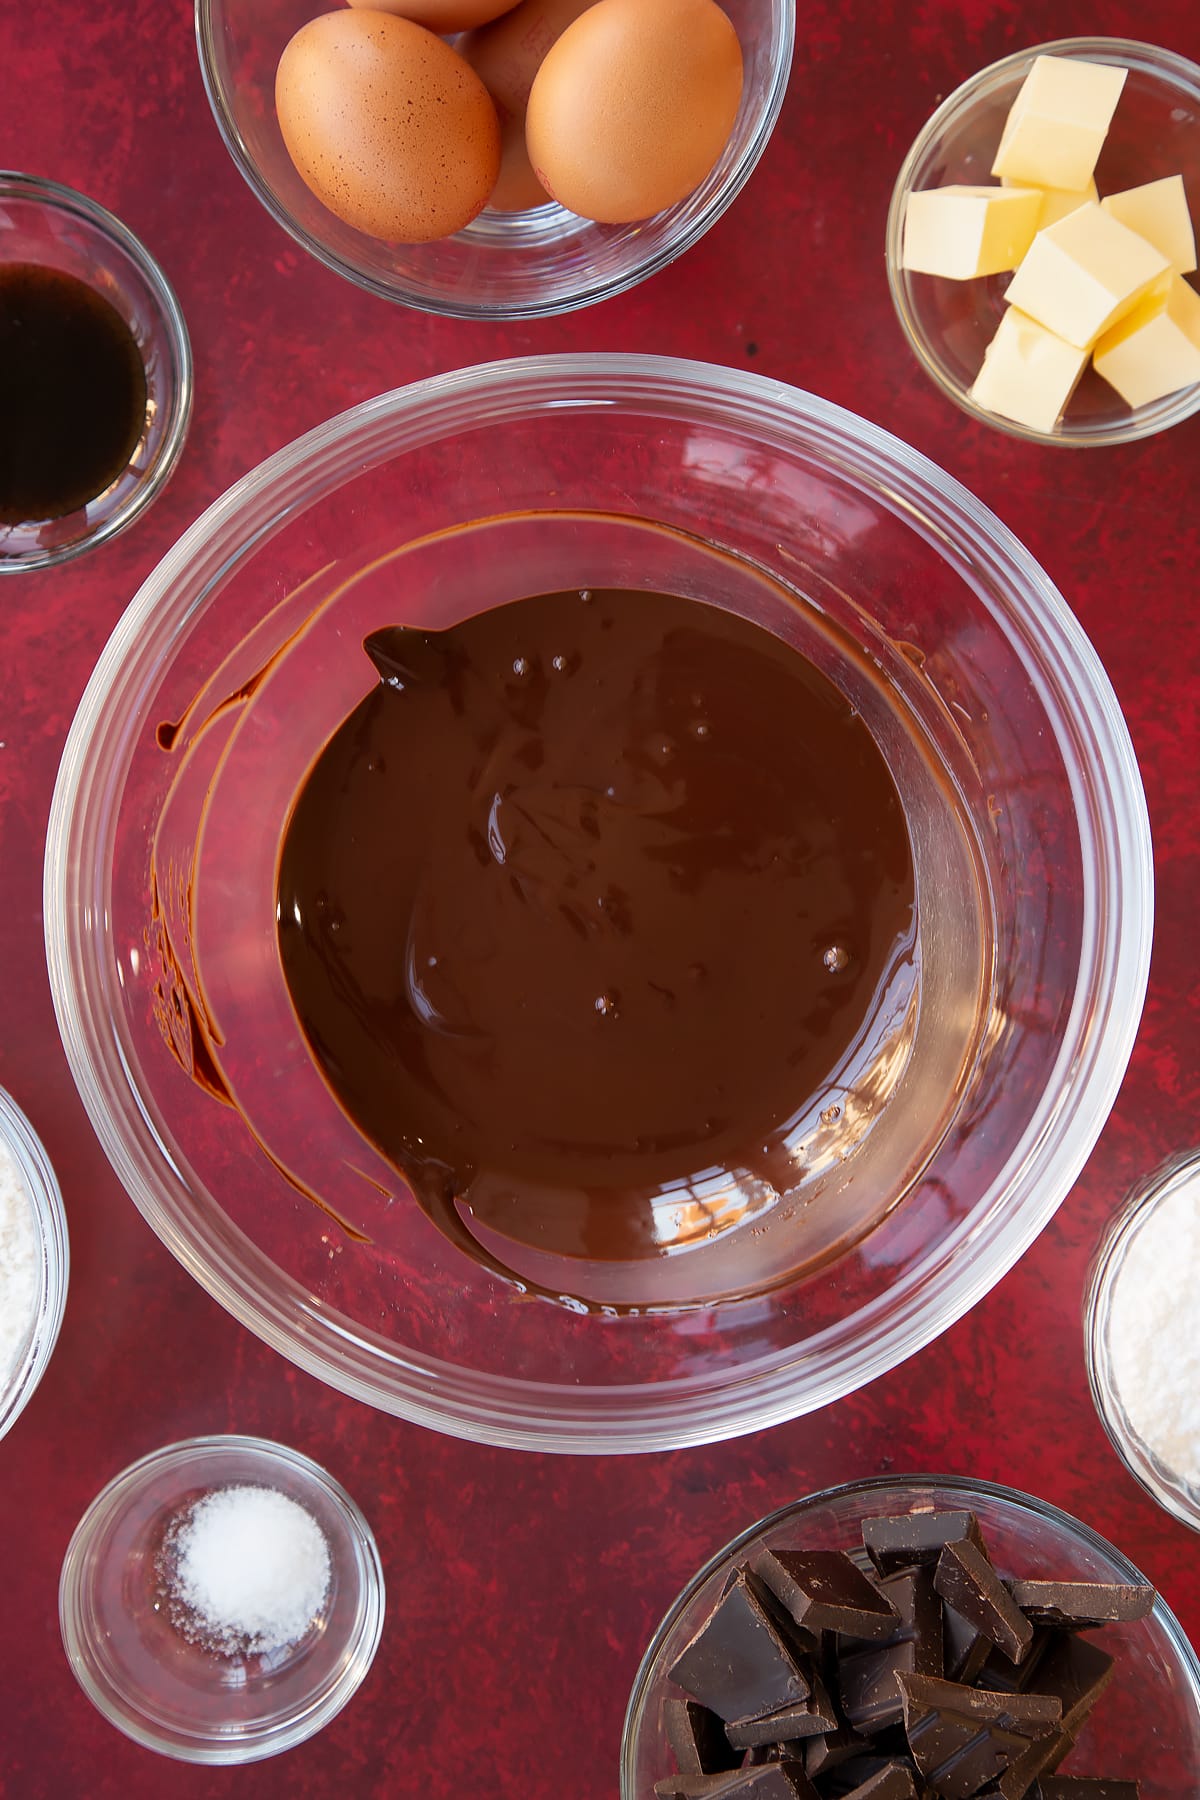 Overhead shot of the dark chocolate having been melted in the bowl.